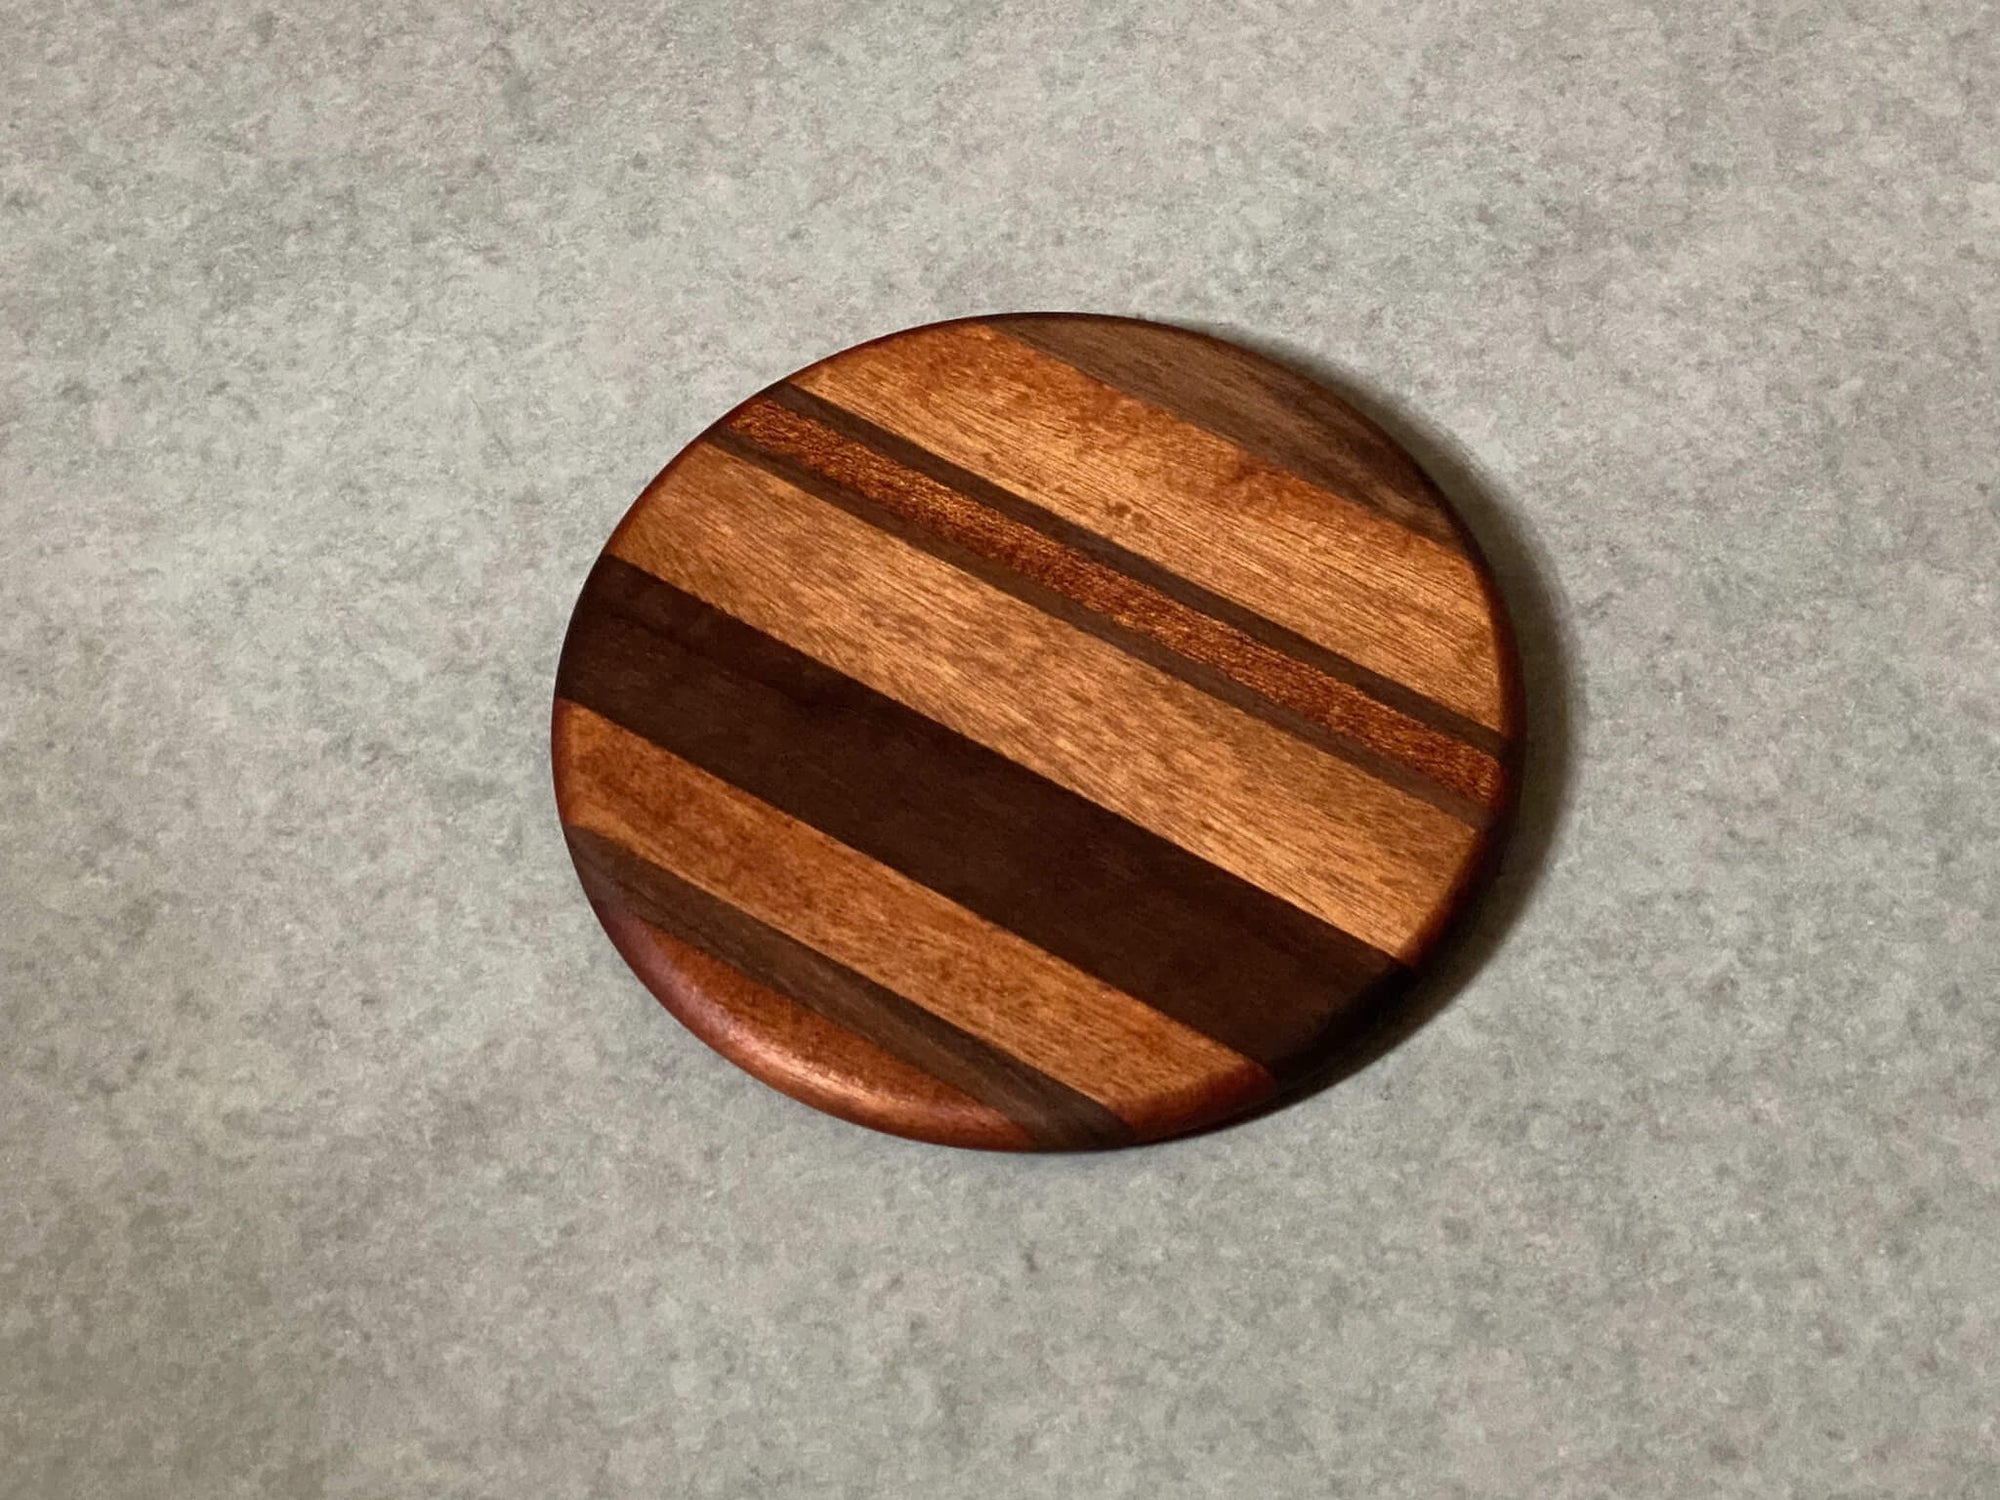 Small round cutting and serving board of maple and mahogany stripes.